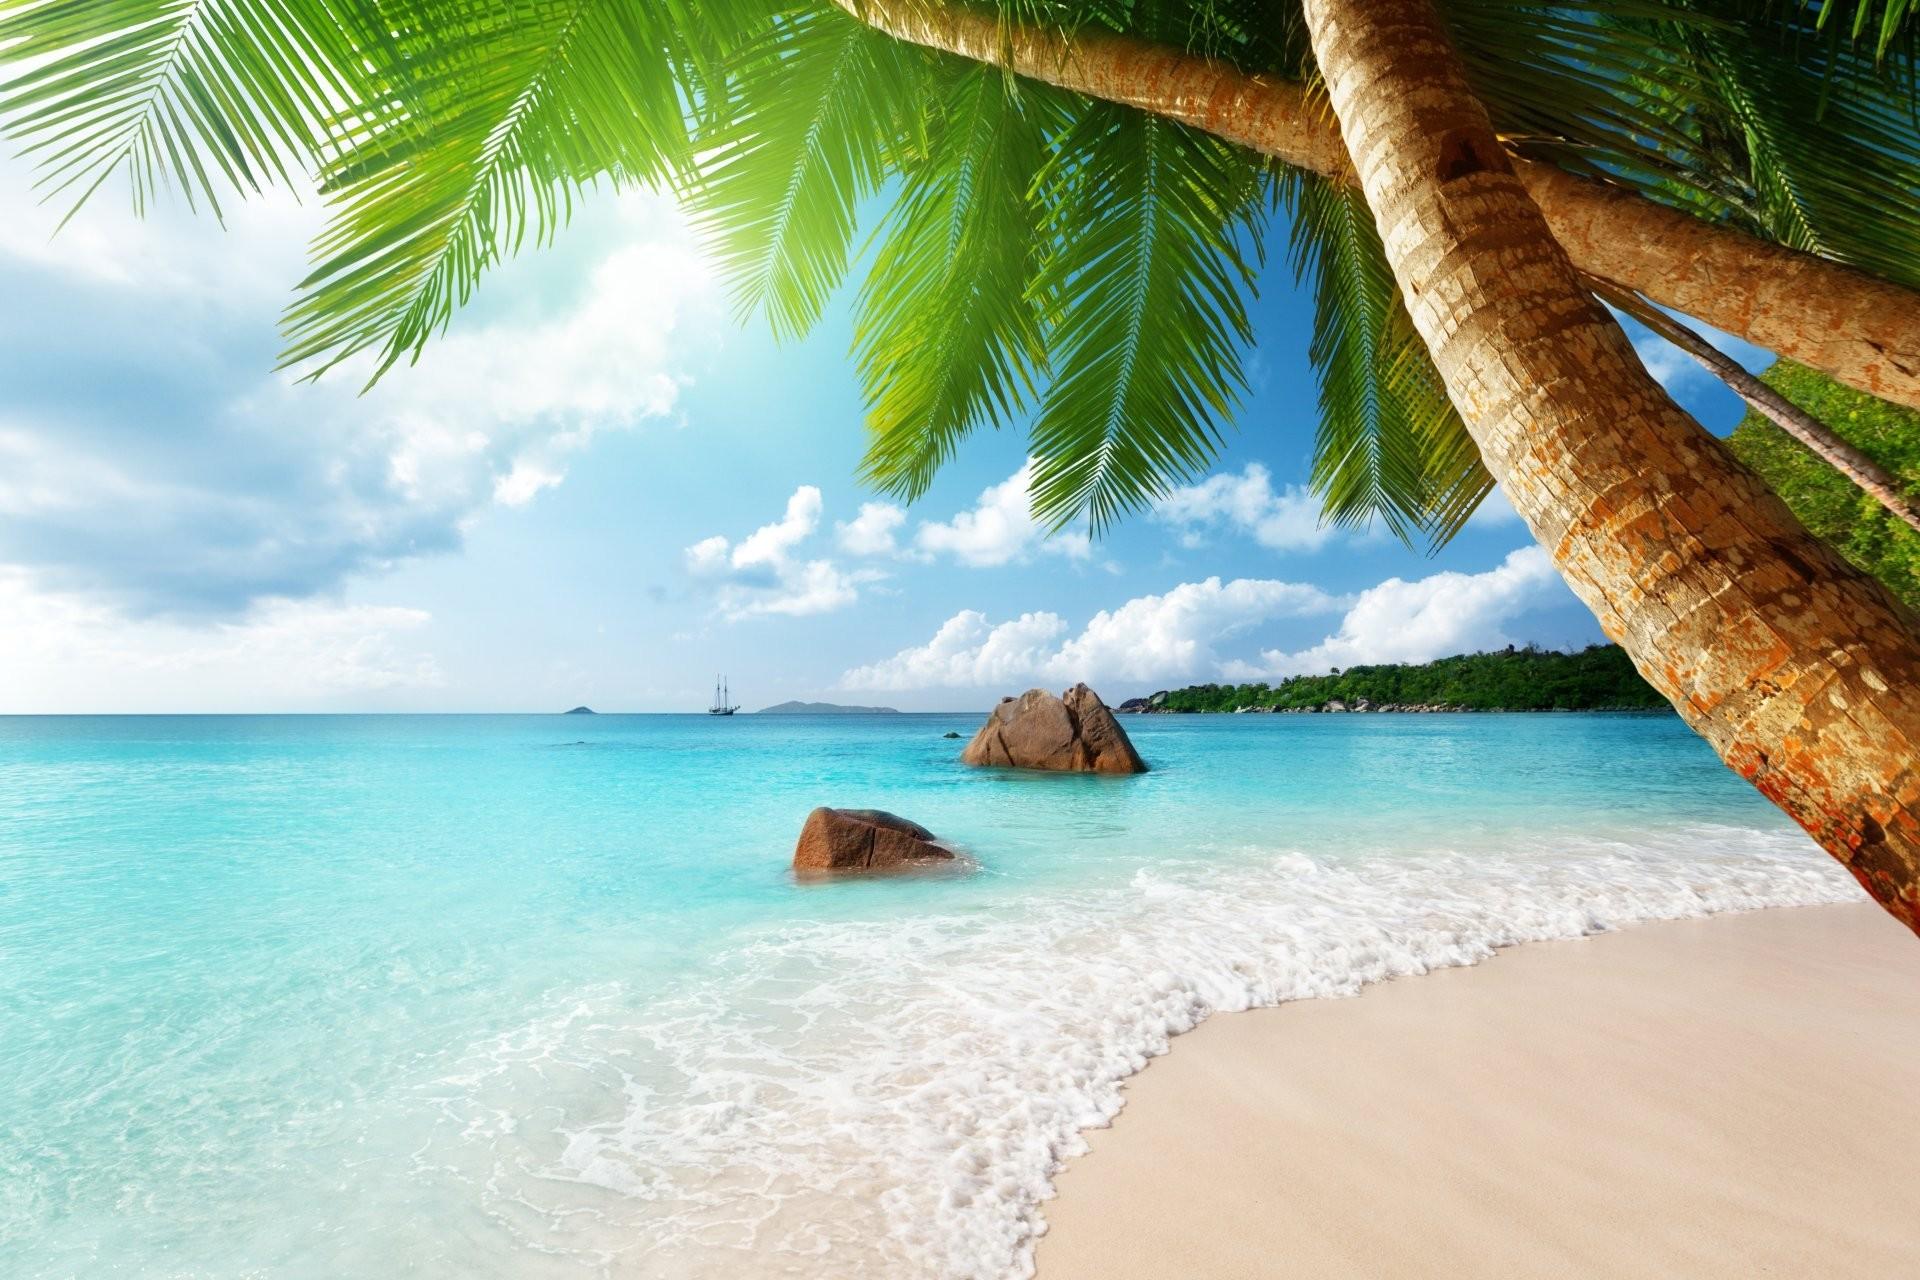 Paradise Beach Wallpapers